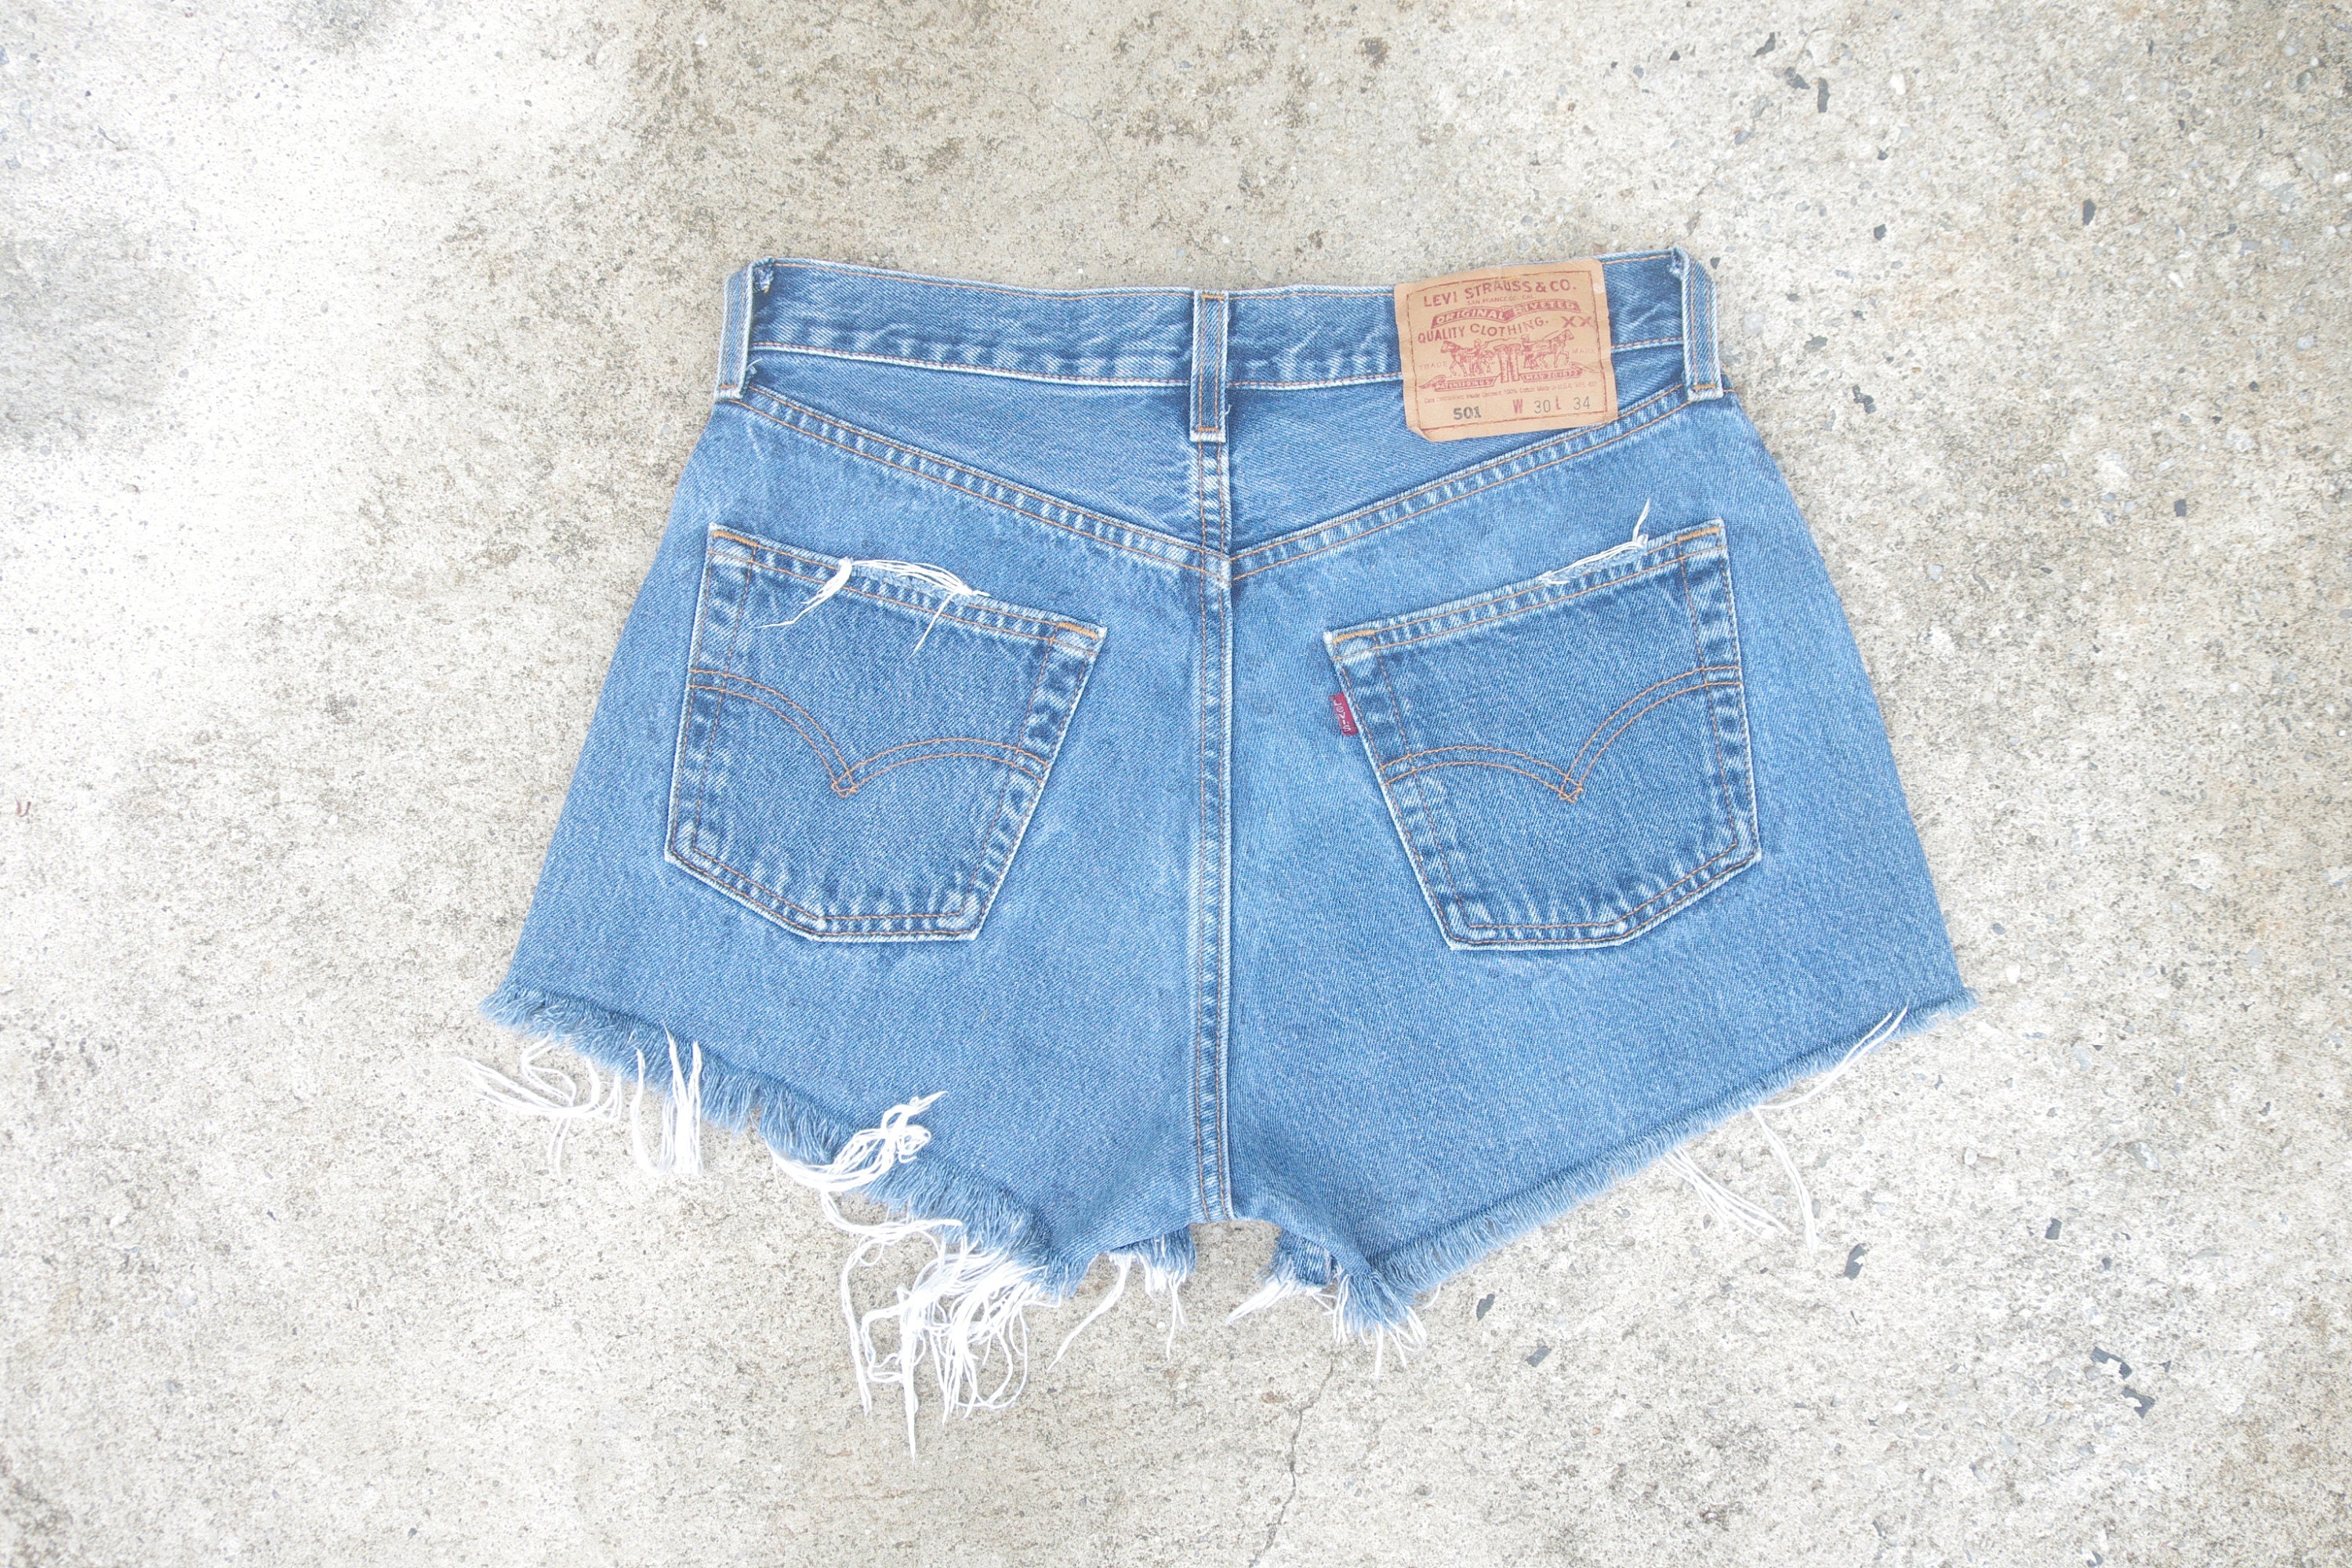 Faded Jeans Levis 501 Cut off W27 W28 Levis for Womenjeans - Etsy